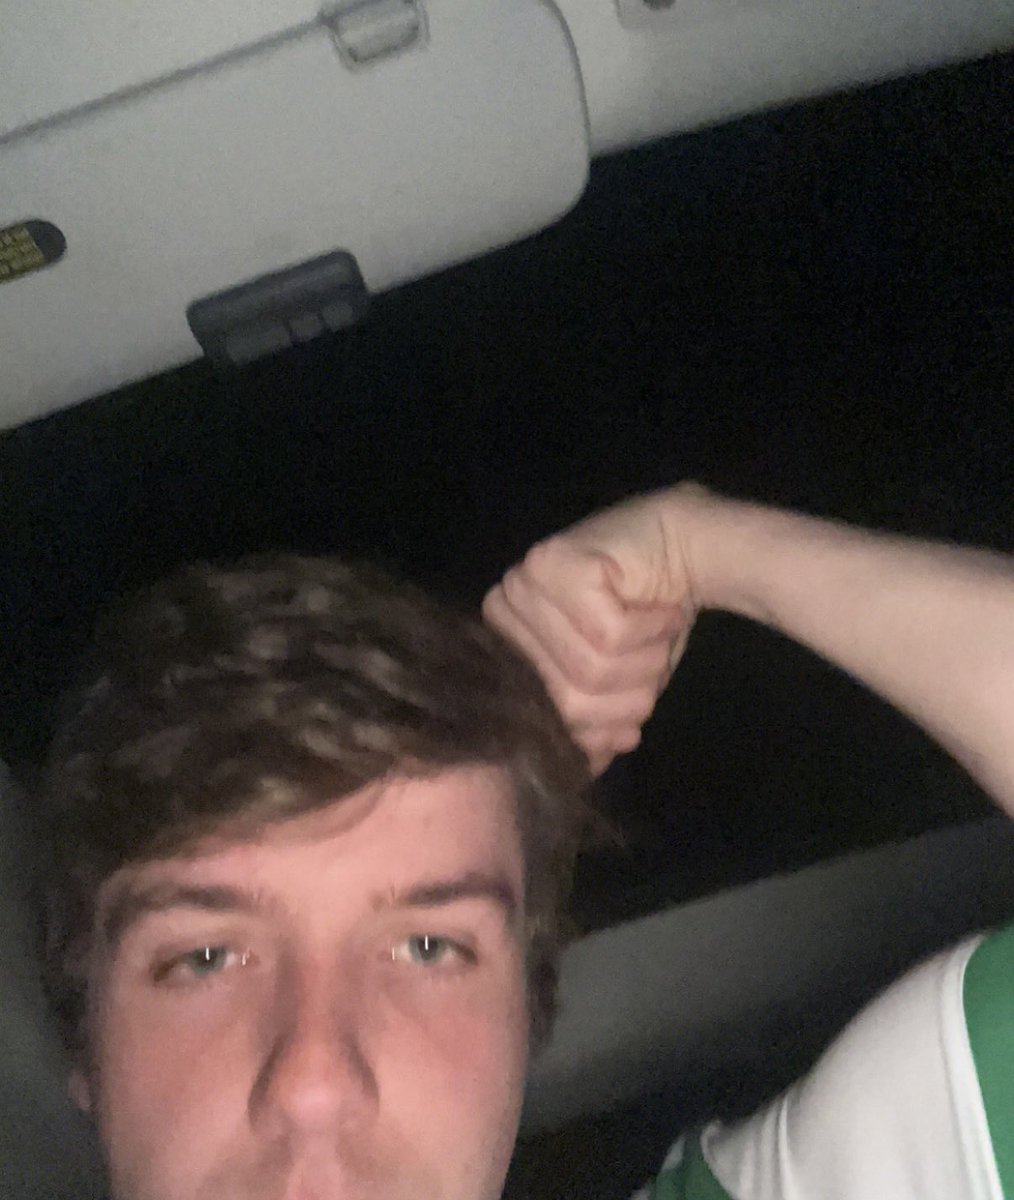 Got pulled over Dork didnt find these guns in the car 💪🏼😹🖕🏼